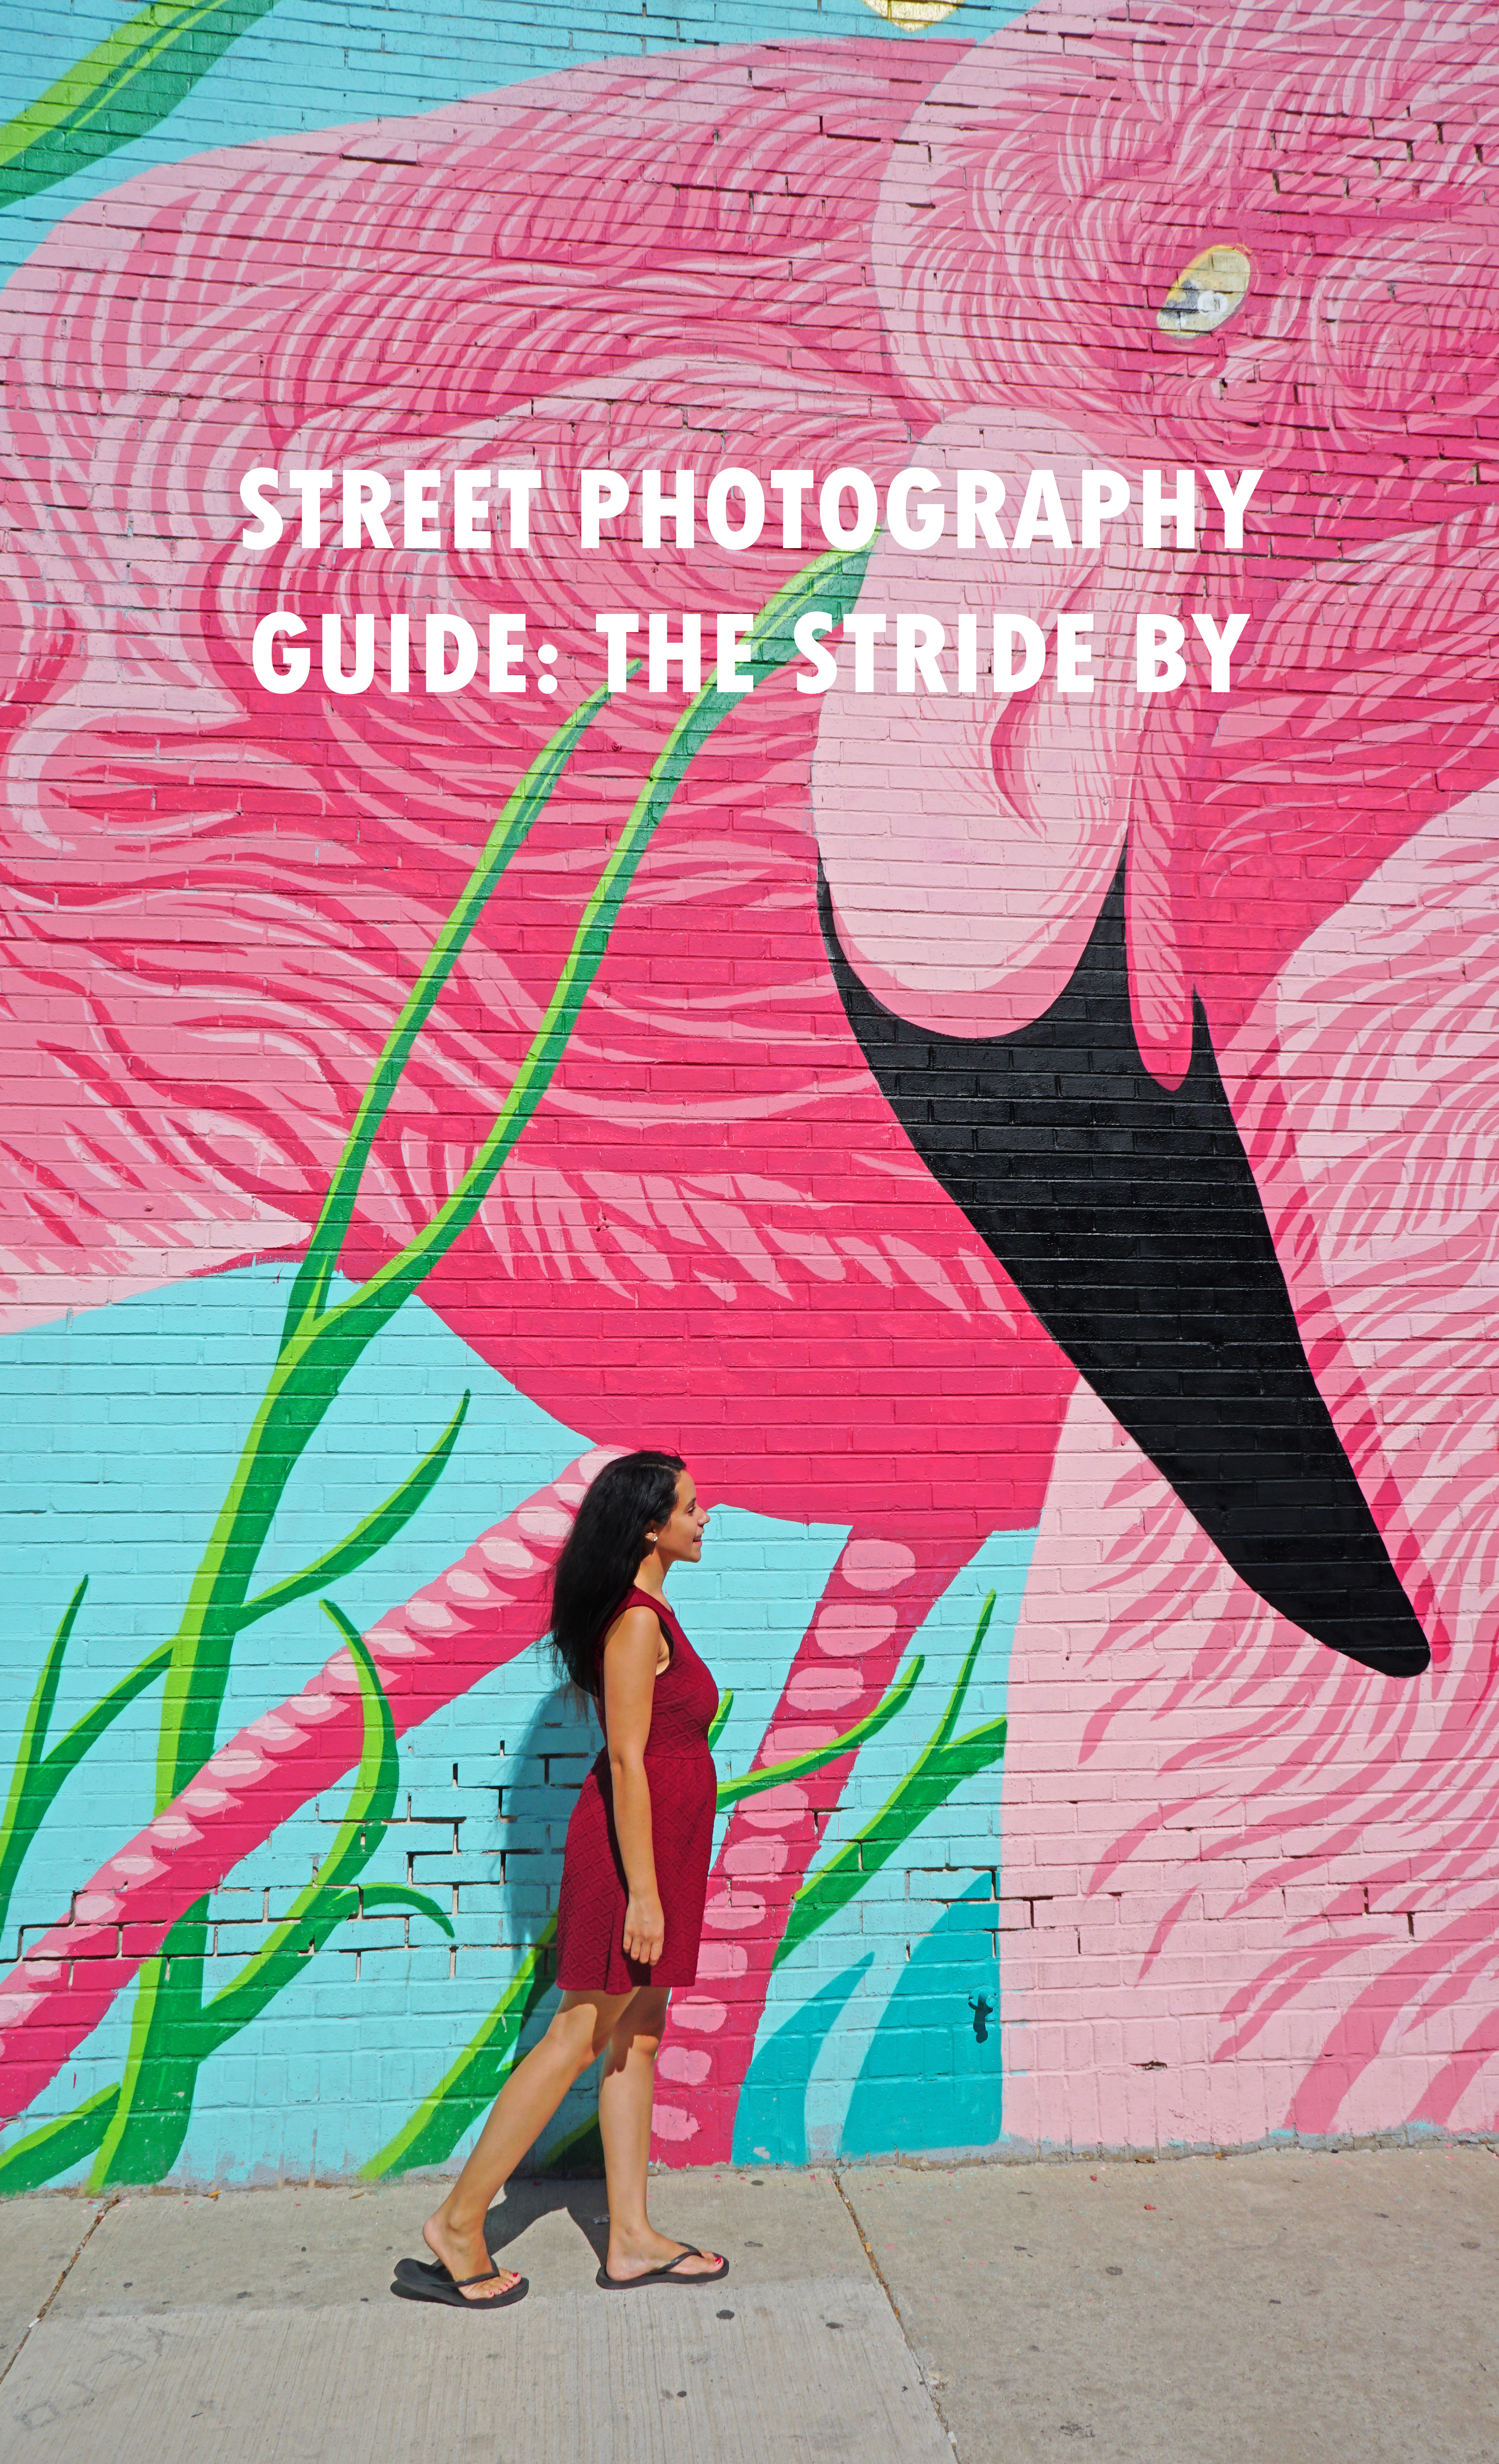 The Travel Women Guide to Street Photography Stride by Chicago Flamingo 